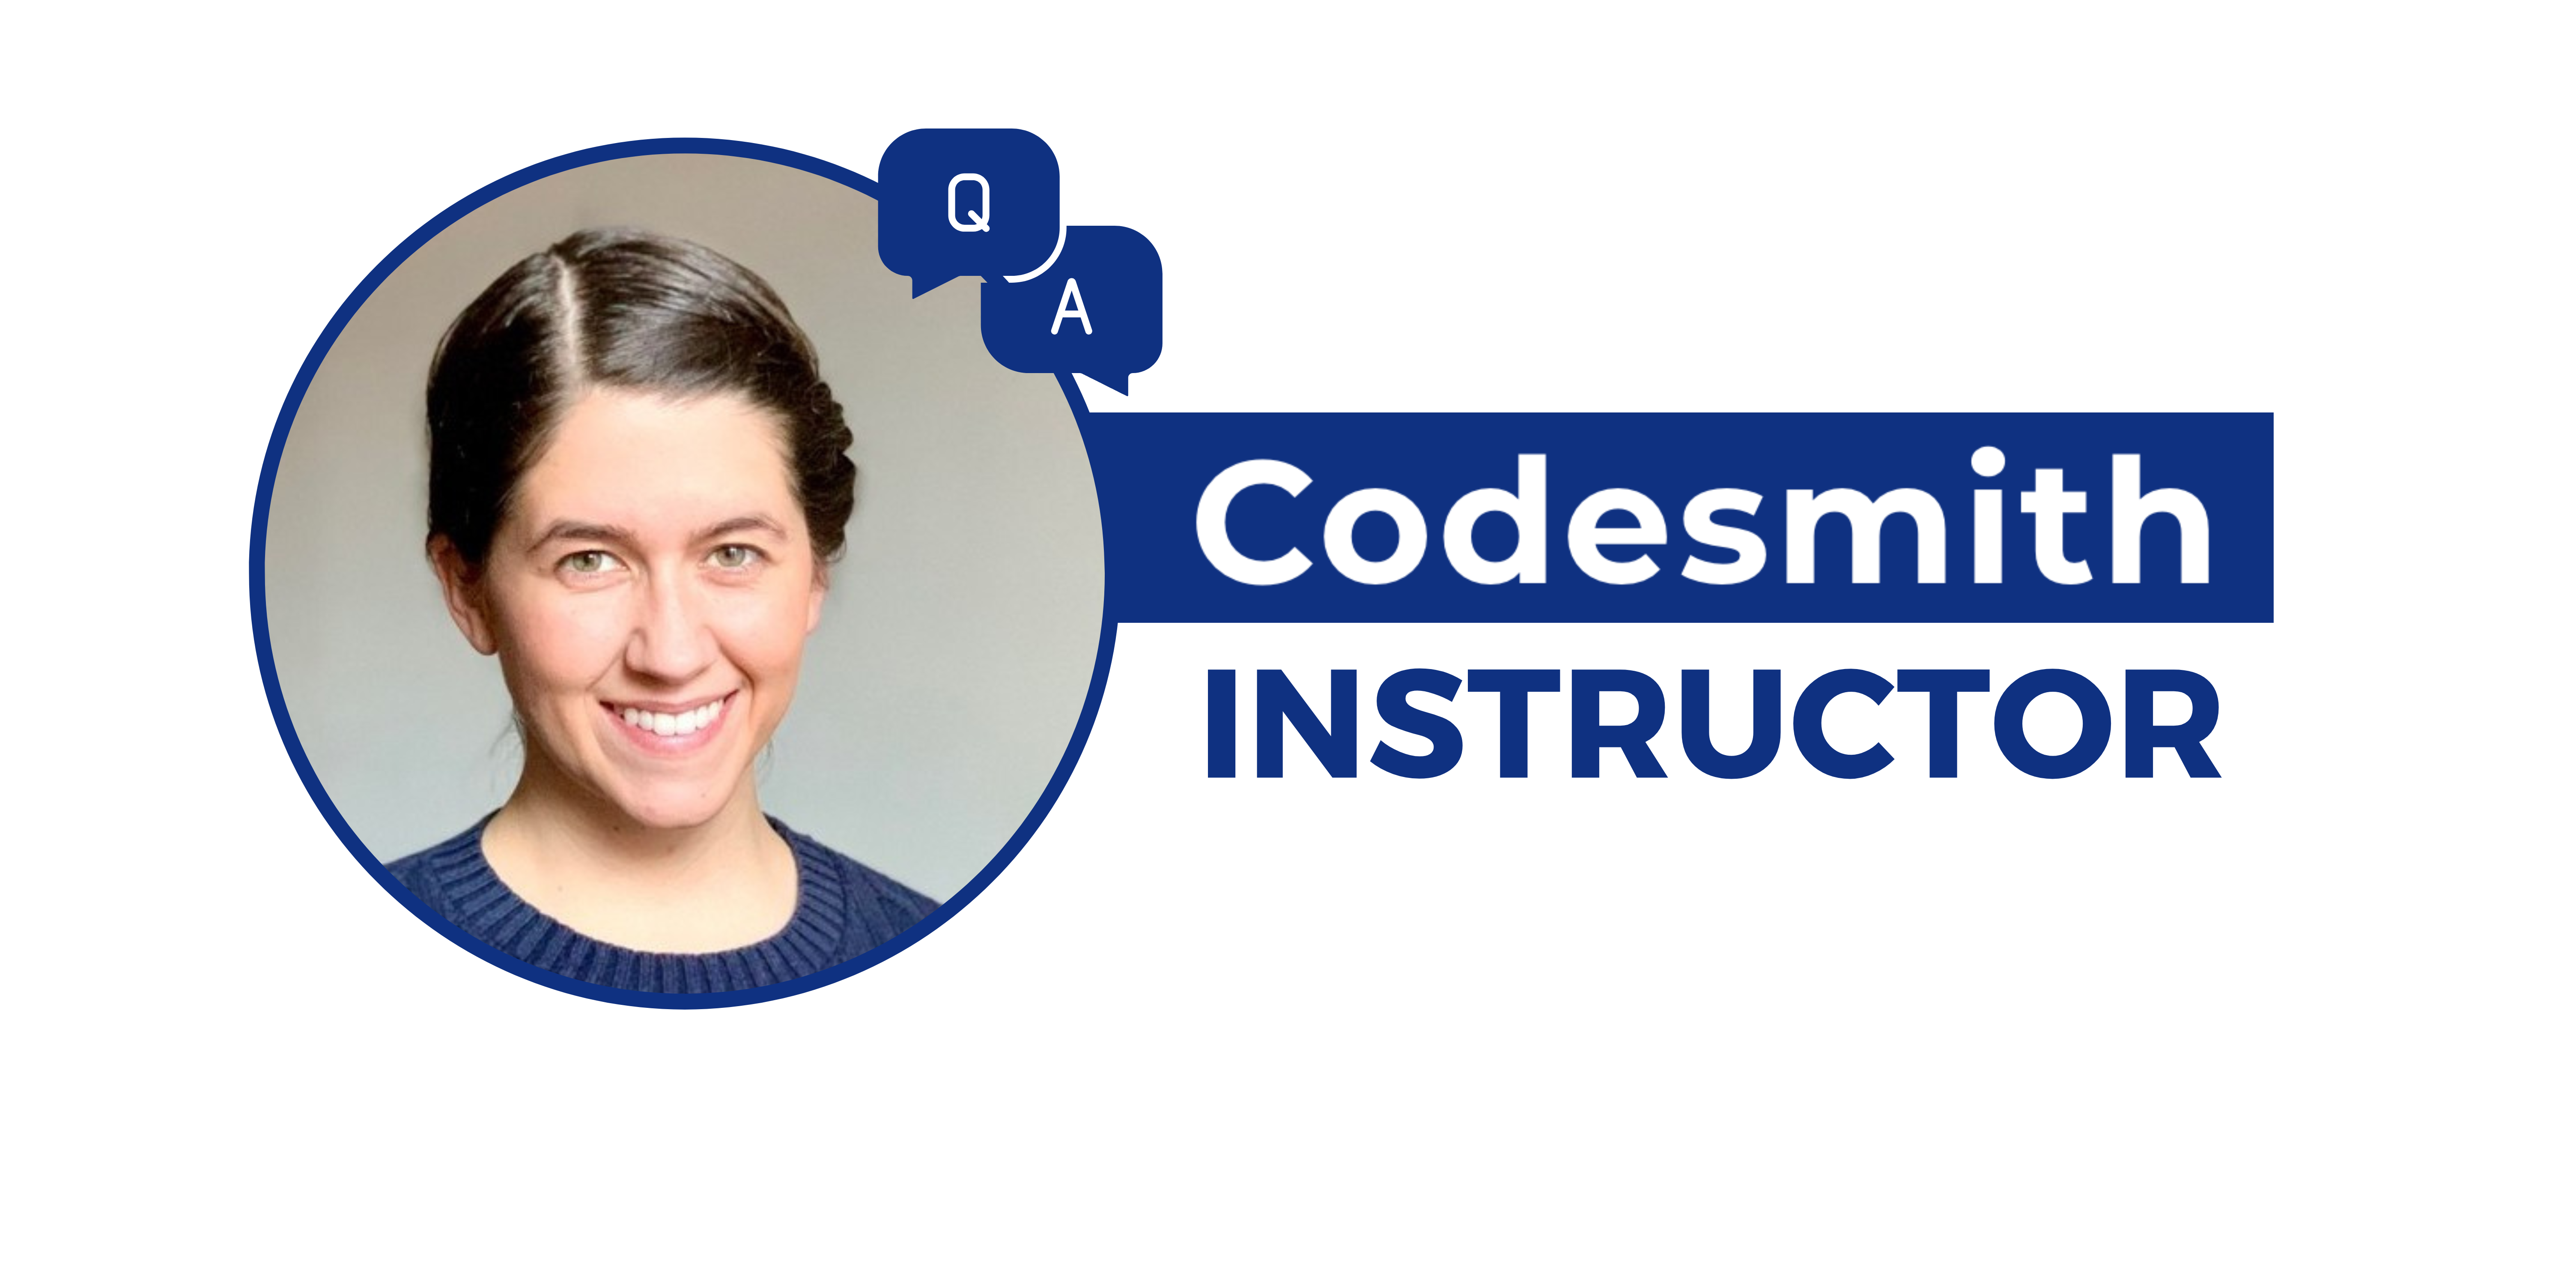 Image of Laura with text that reads Codesmith Instructor Q&A